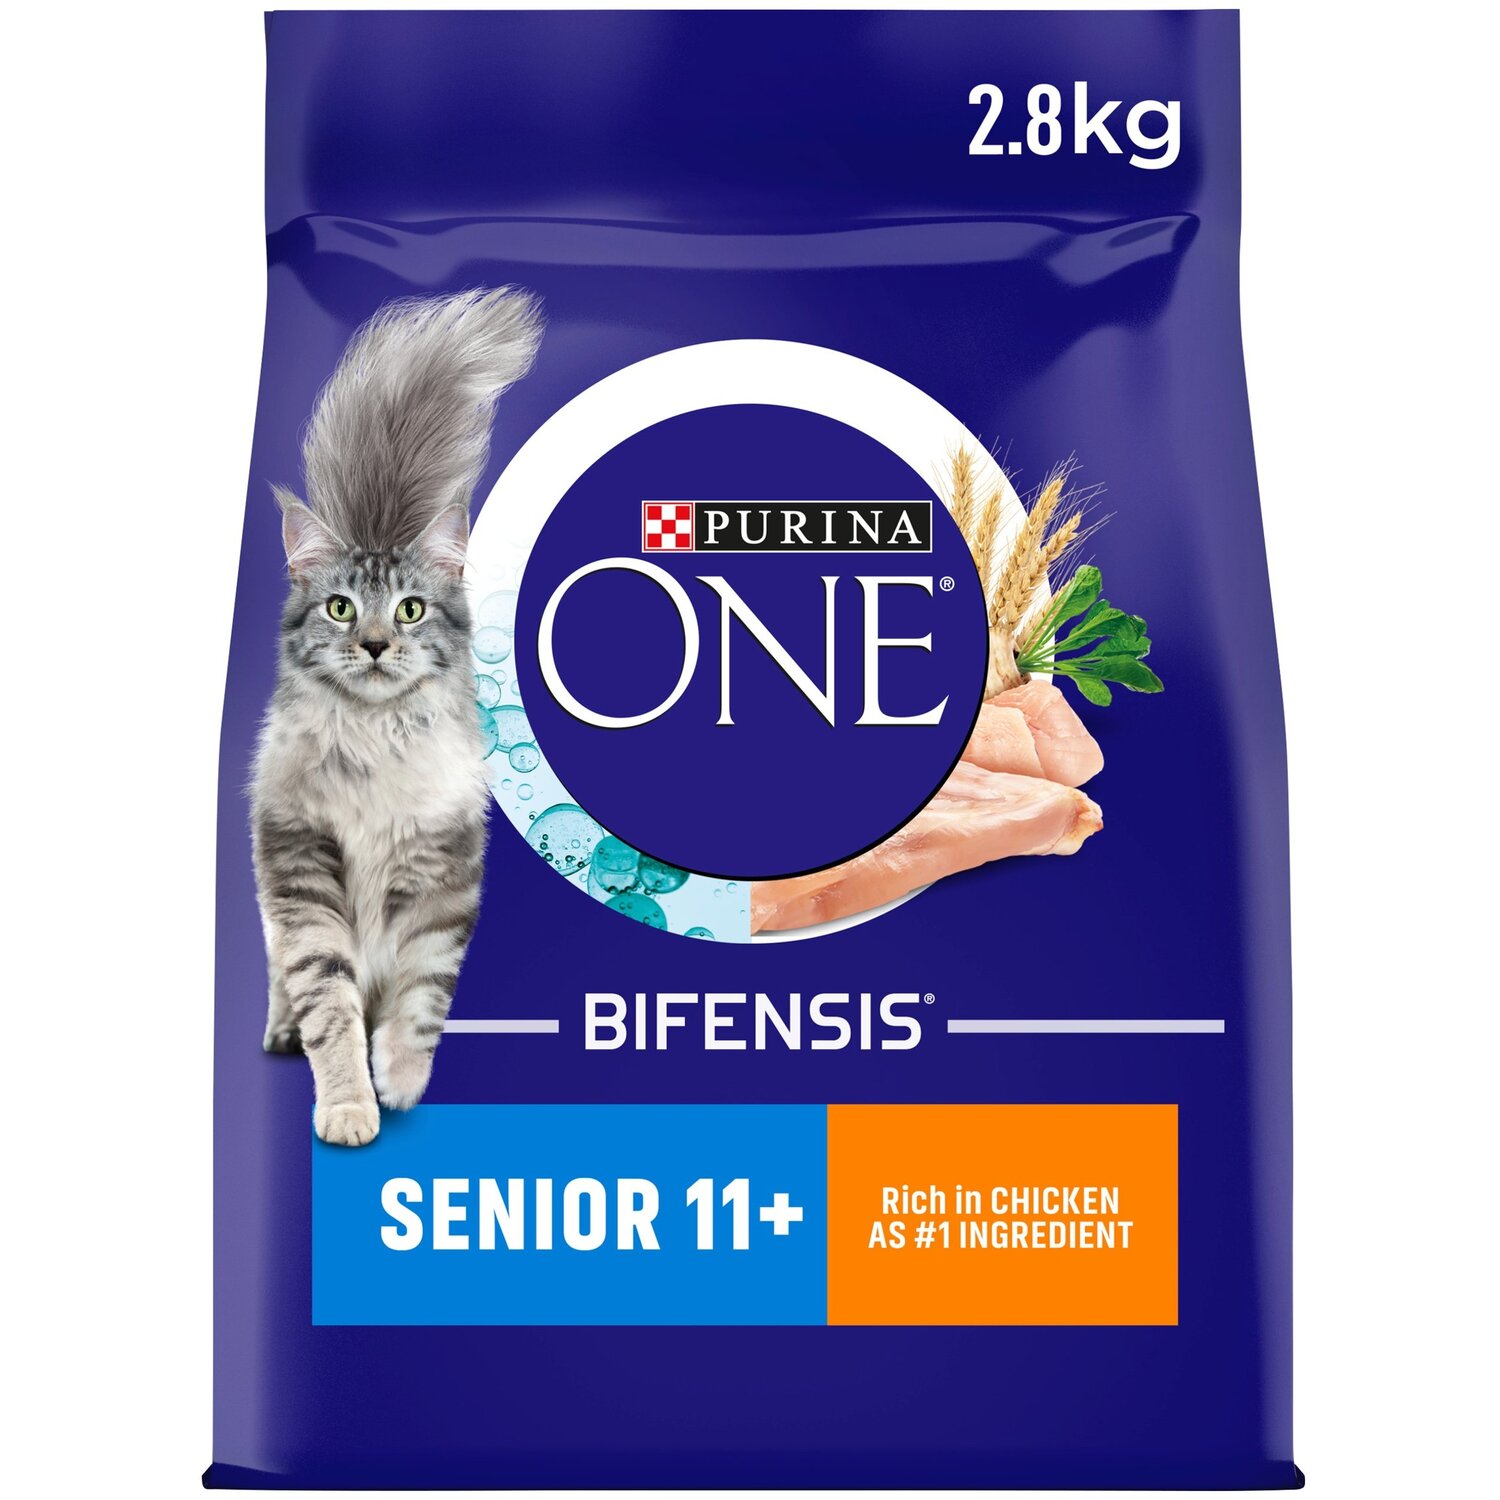 Purina One Chicken and Wholegrain Adult Dry Cat Food 2.8kg Image 1